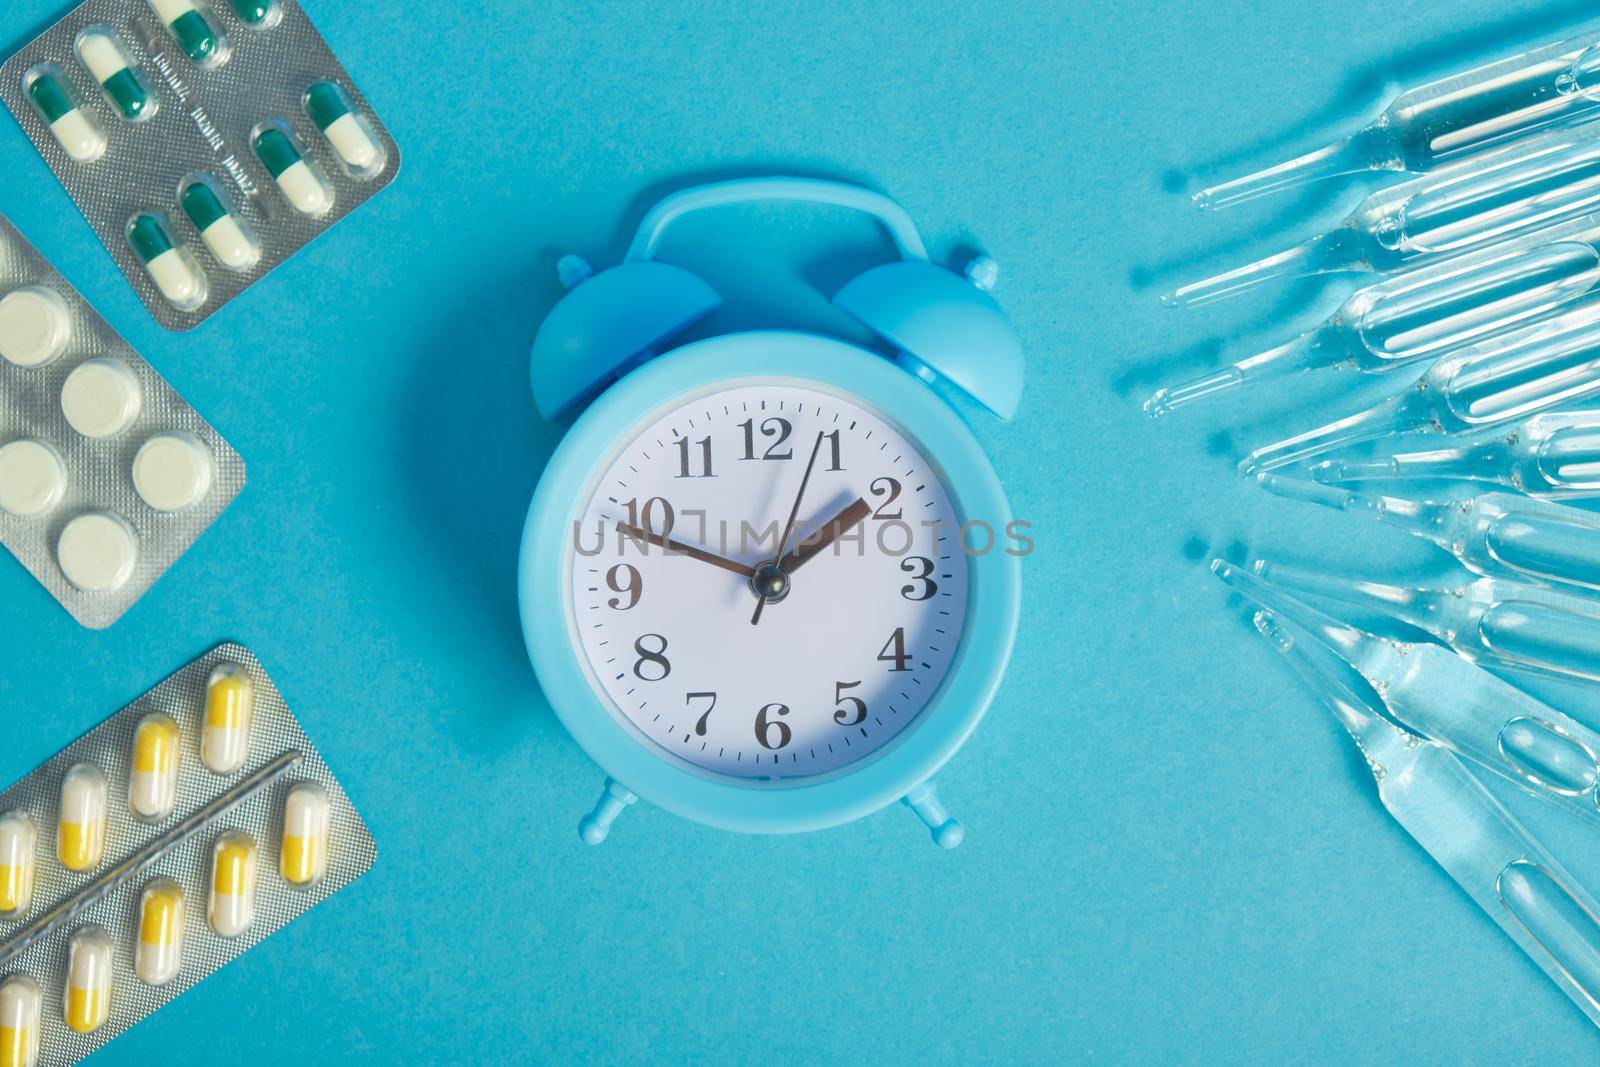 light blue alarm clock and medicines on a blue background, ampoules and packs of pills around the clock, time to take medicines